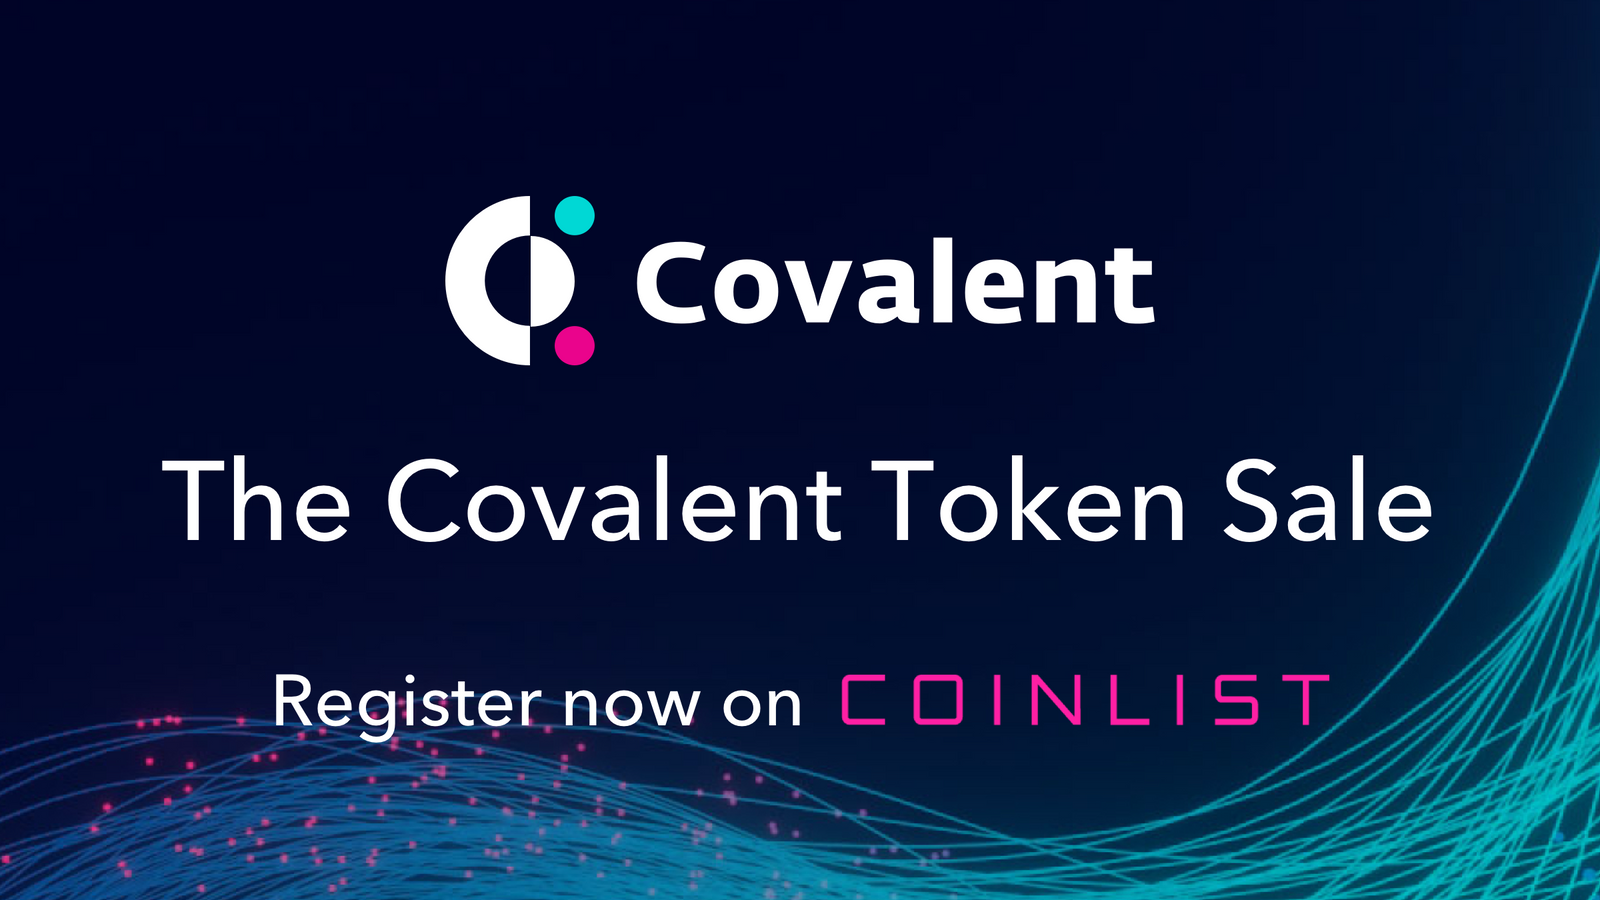 Announcing the Covalent Token Sale on CoinList